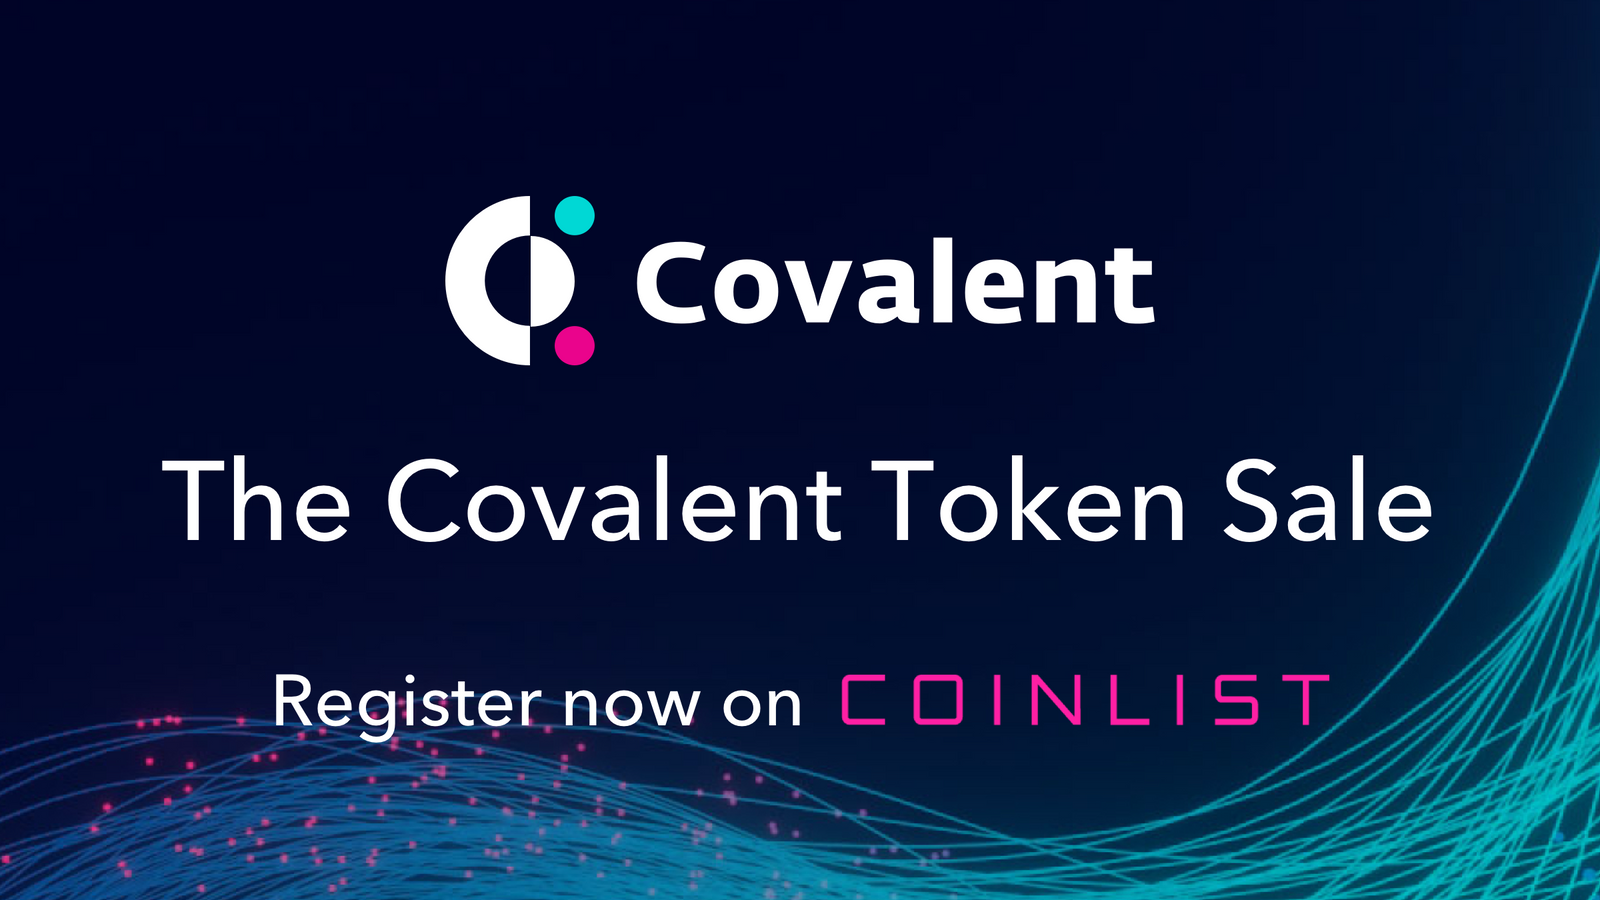 Announcing the Covalent Token Sale on CoinList